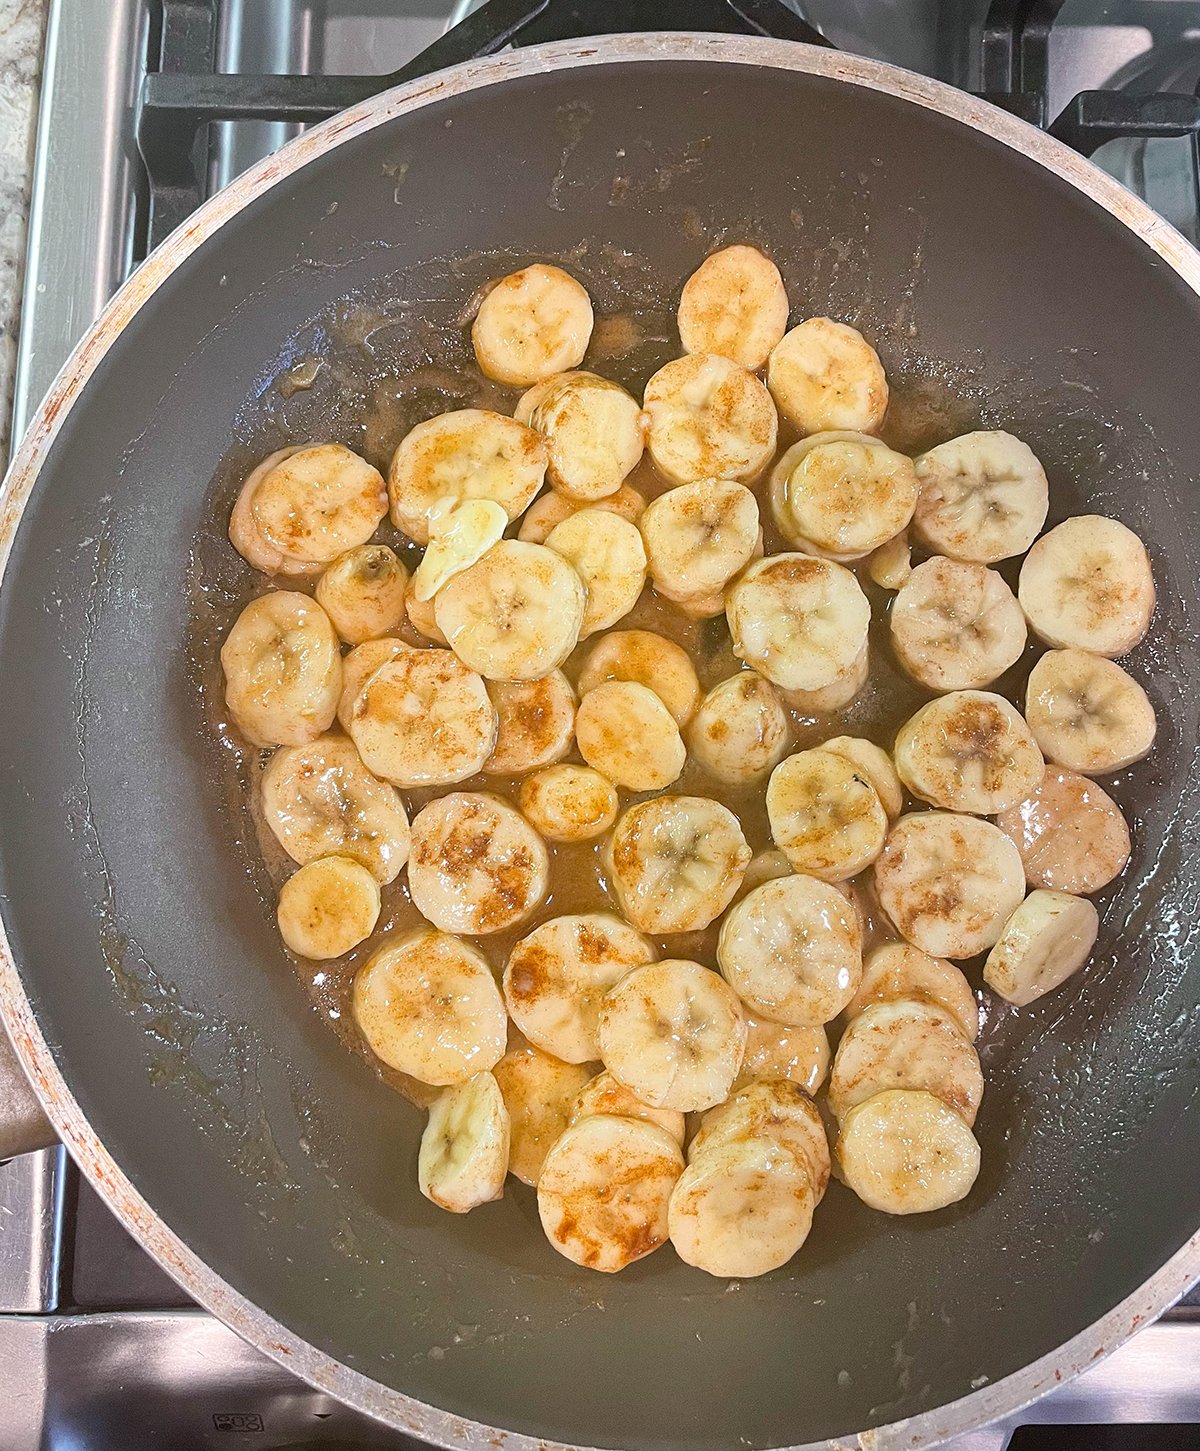 Toss bananas with other ingredients until caramelized and soft